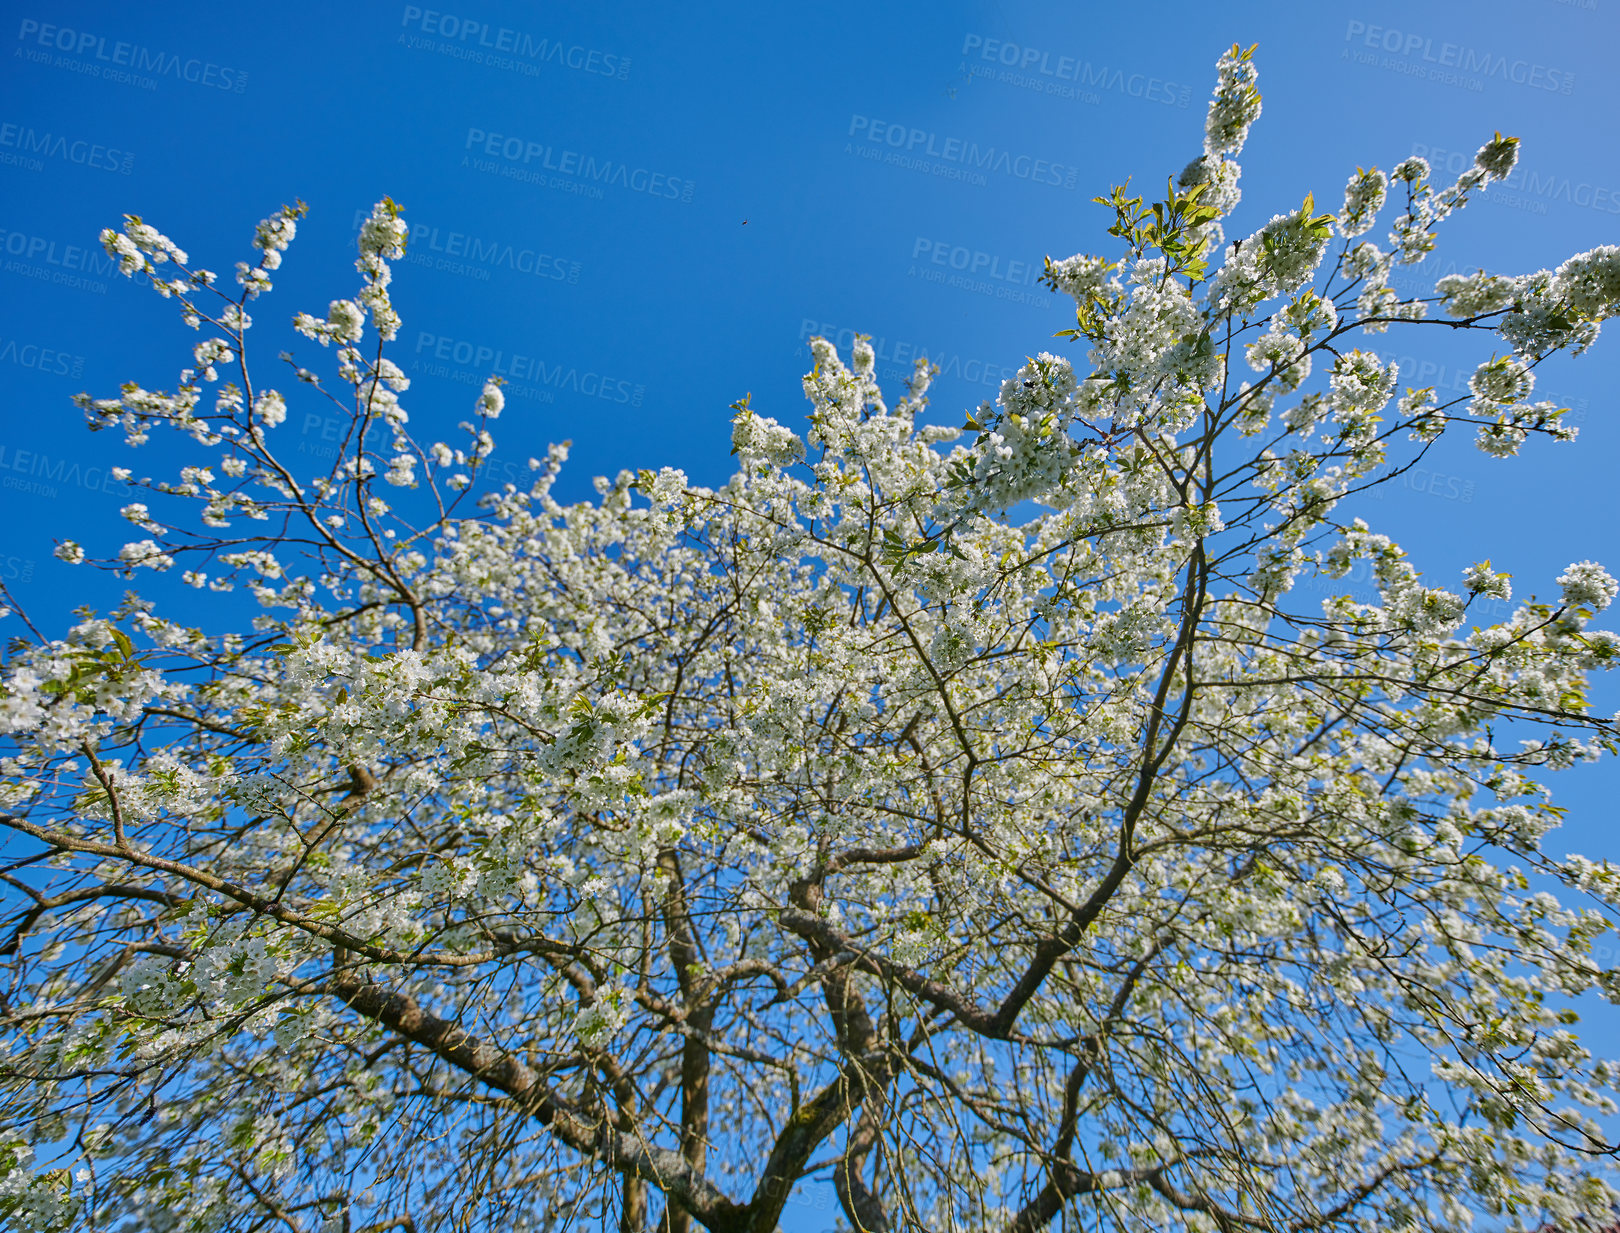 Buy stock photo Flowering cherry blossom tree with white flower heads in nature or a botanical garden in spring. Landscape of tree with white flowers in full bloom against a blue sky background with copyspace. 